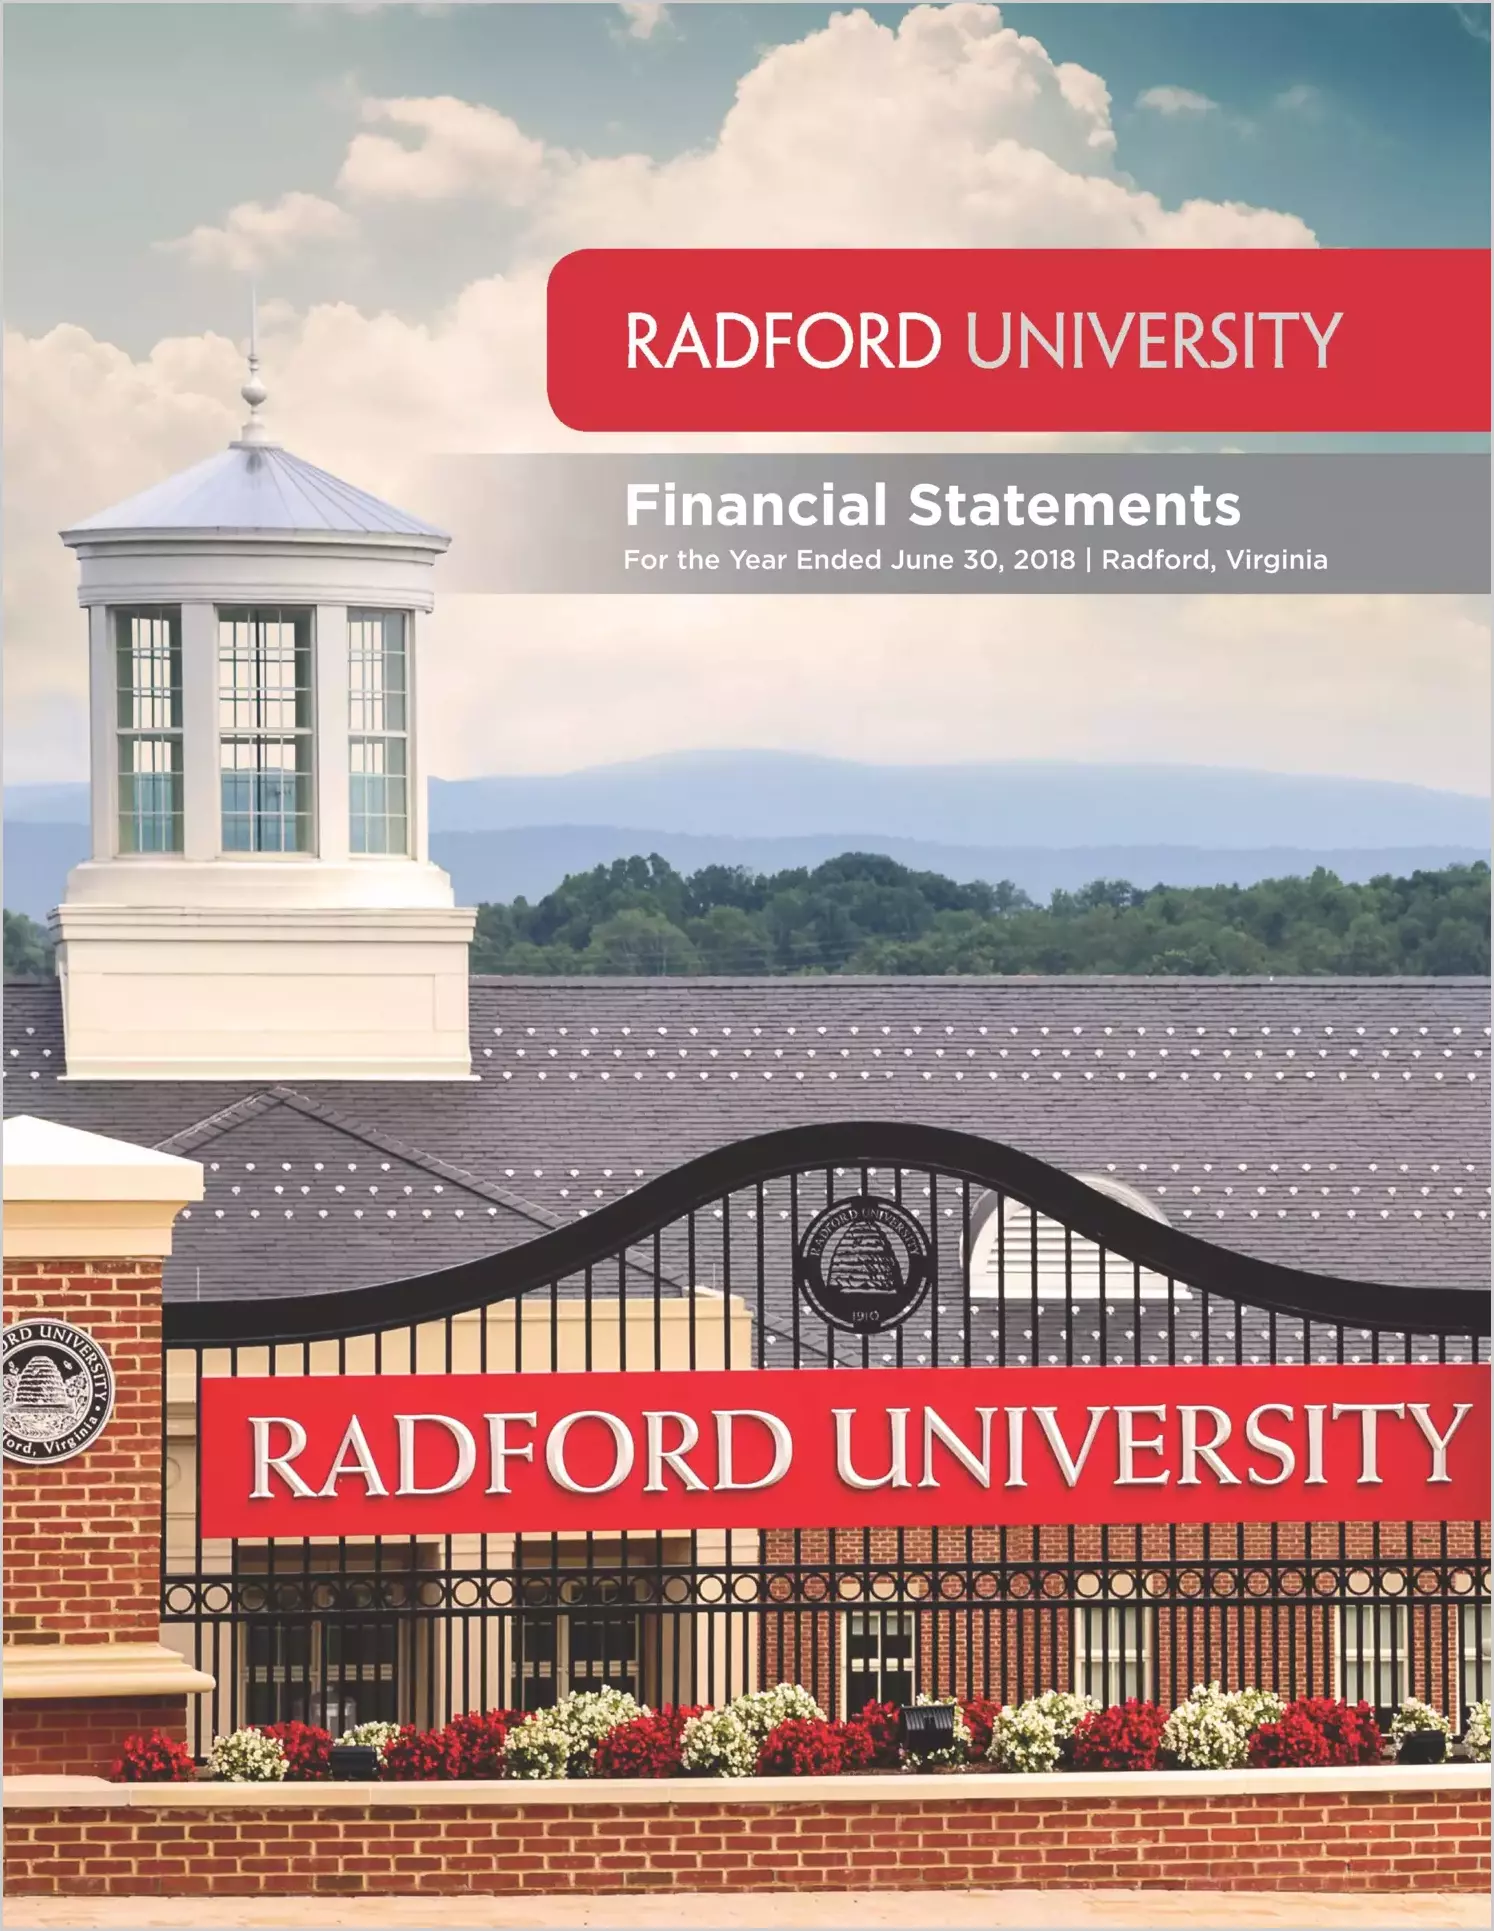 Radford University Financial Statements for the year ended June 30, 2018